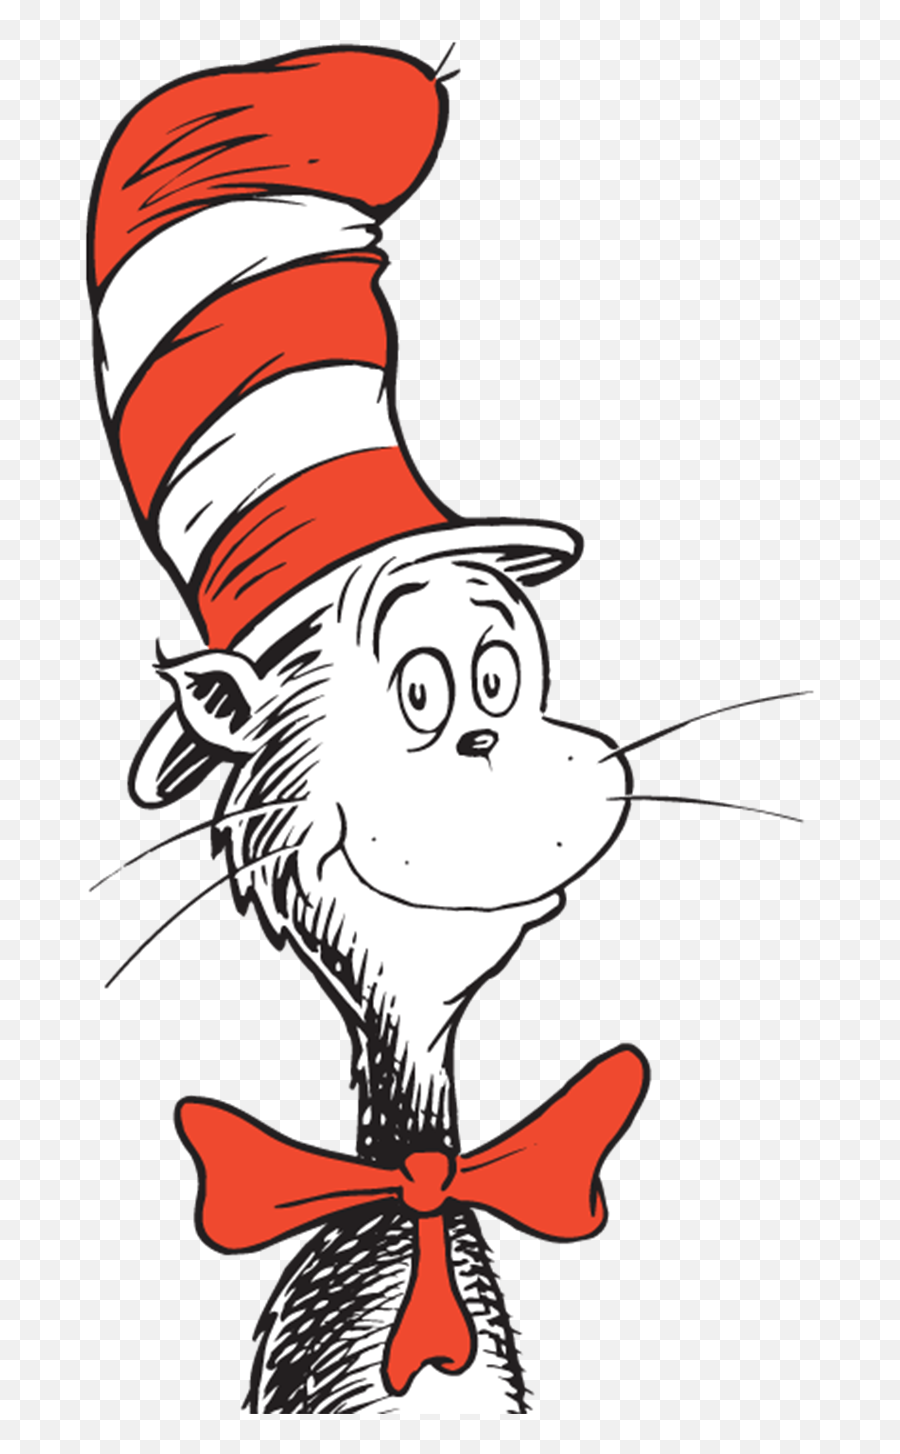 Dr Seuss The Cat In The Hat Giant Emoji,Cat In The Hat Transparent